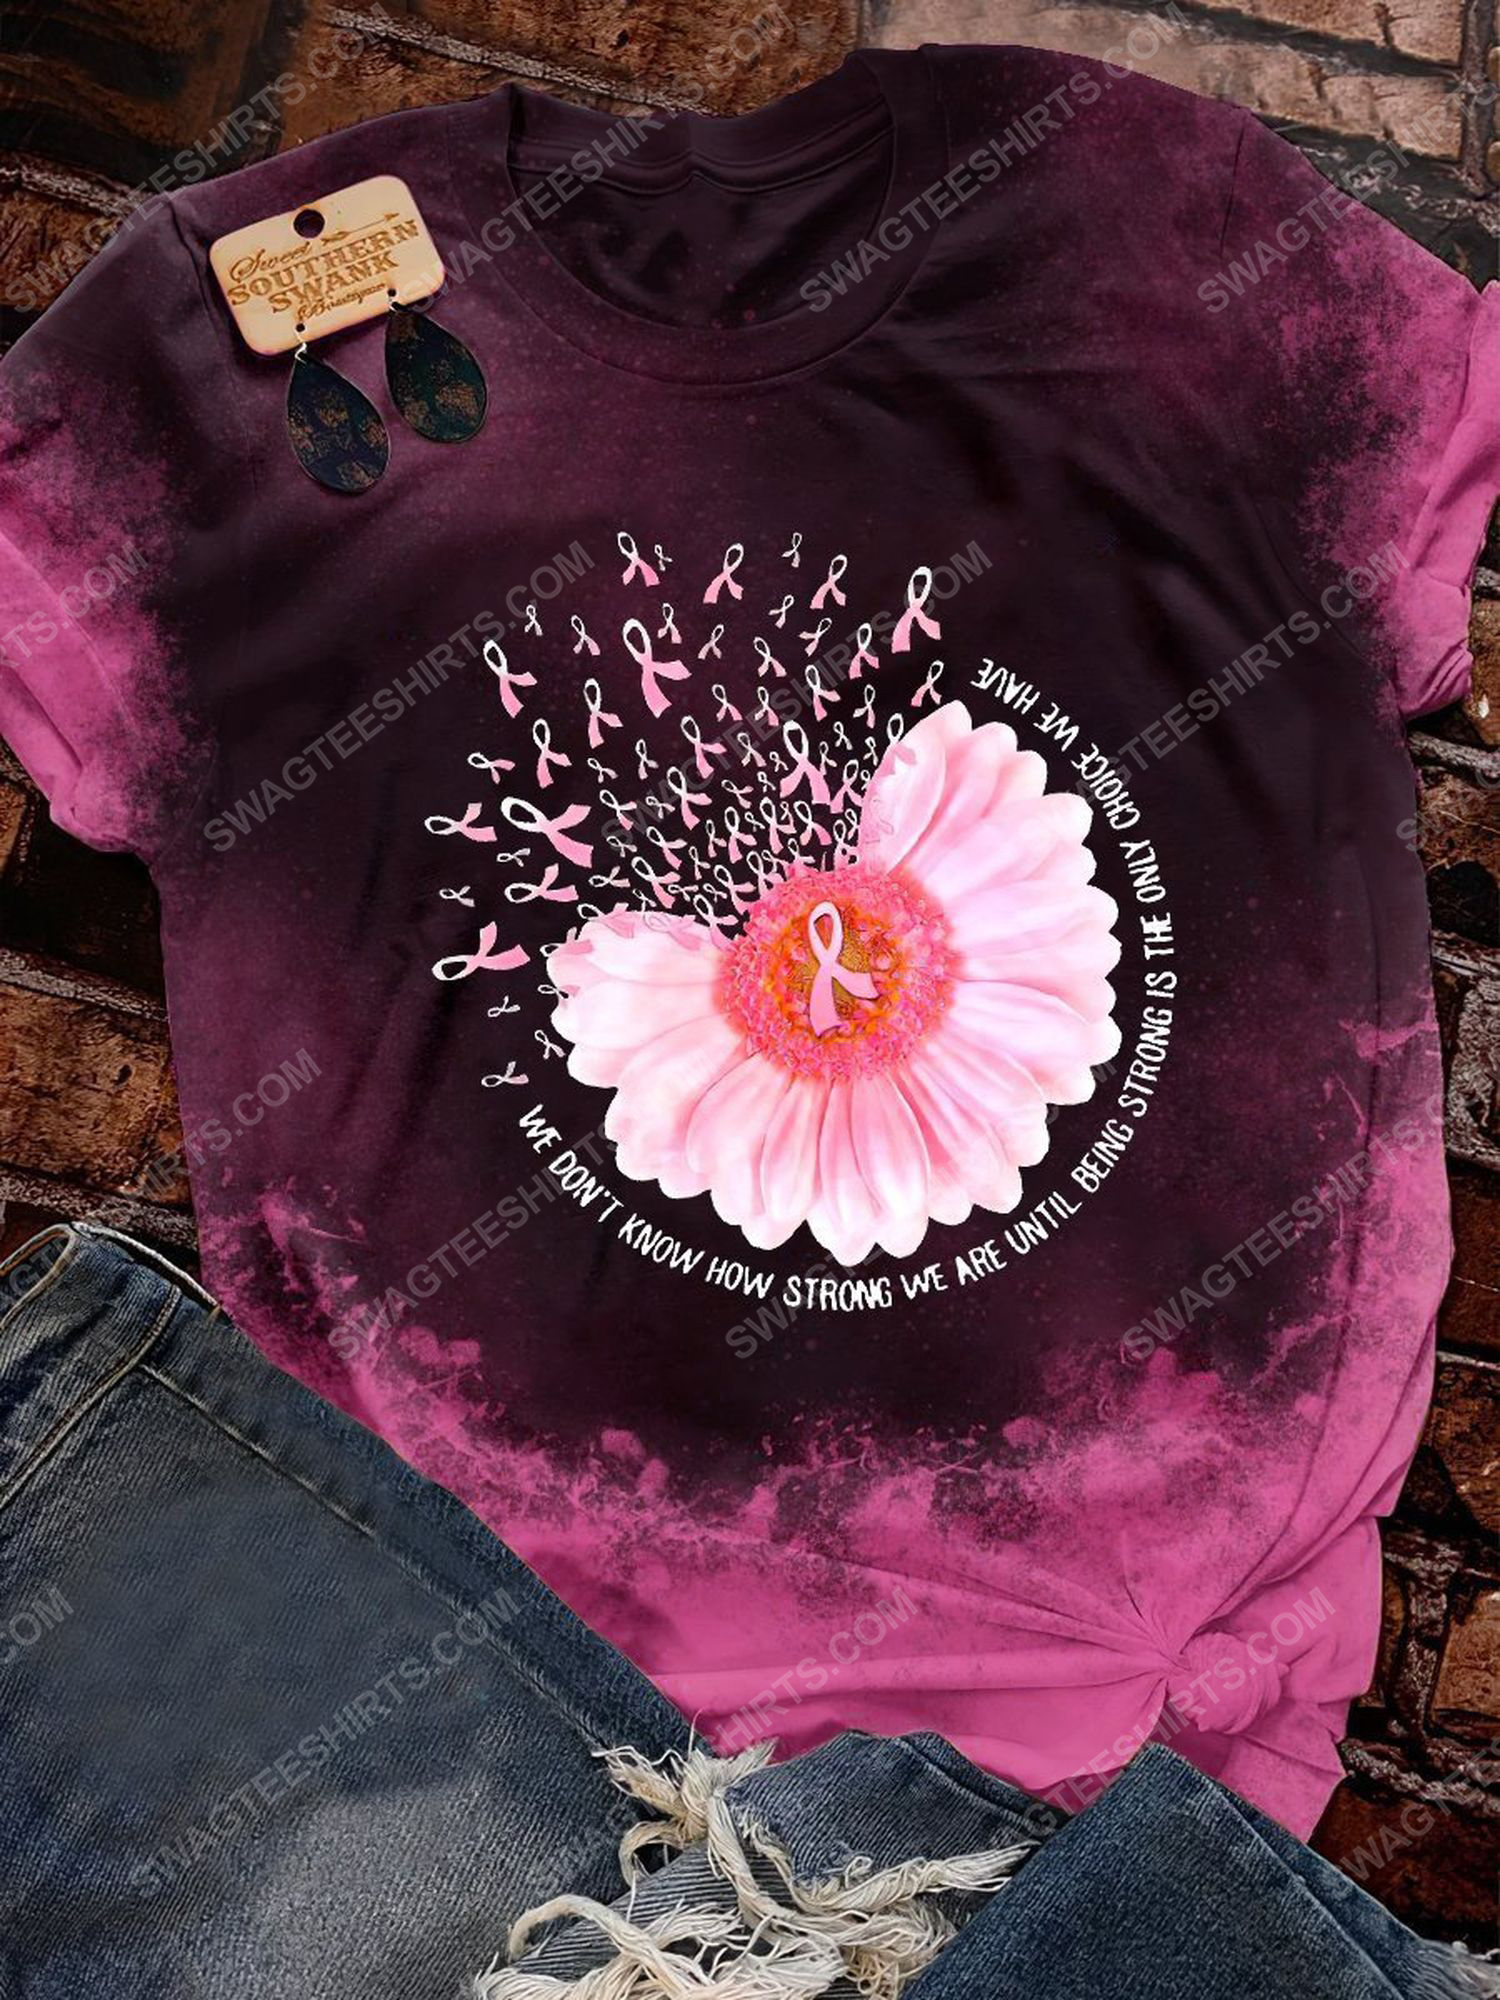 [special edition] Breast cancer awareness flowers ribbon tie dye shirt – maria (cancer)